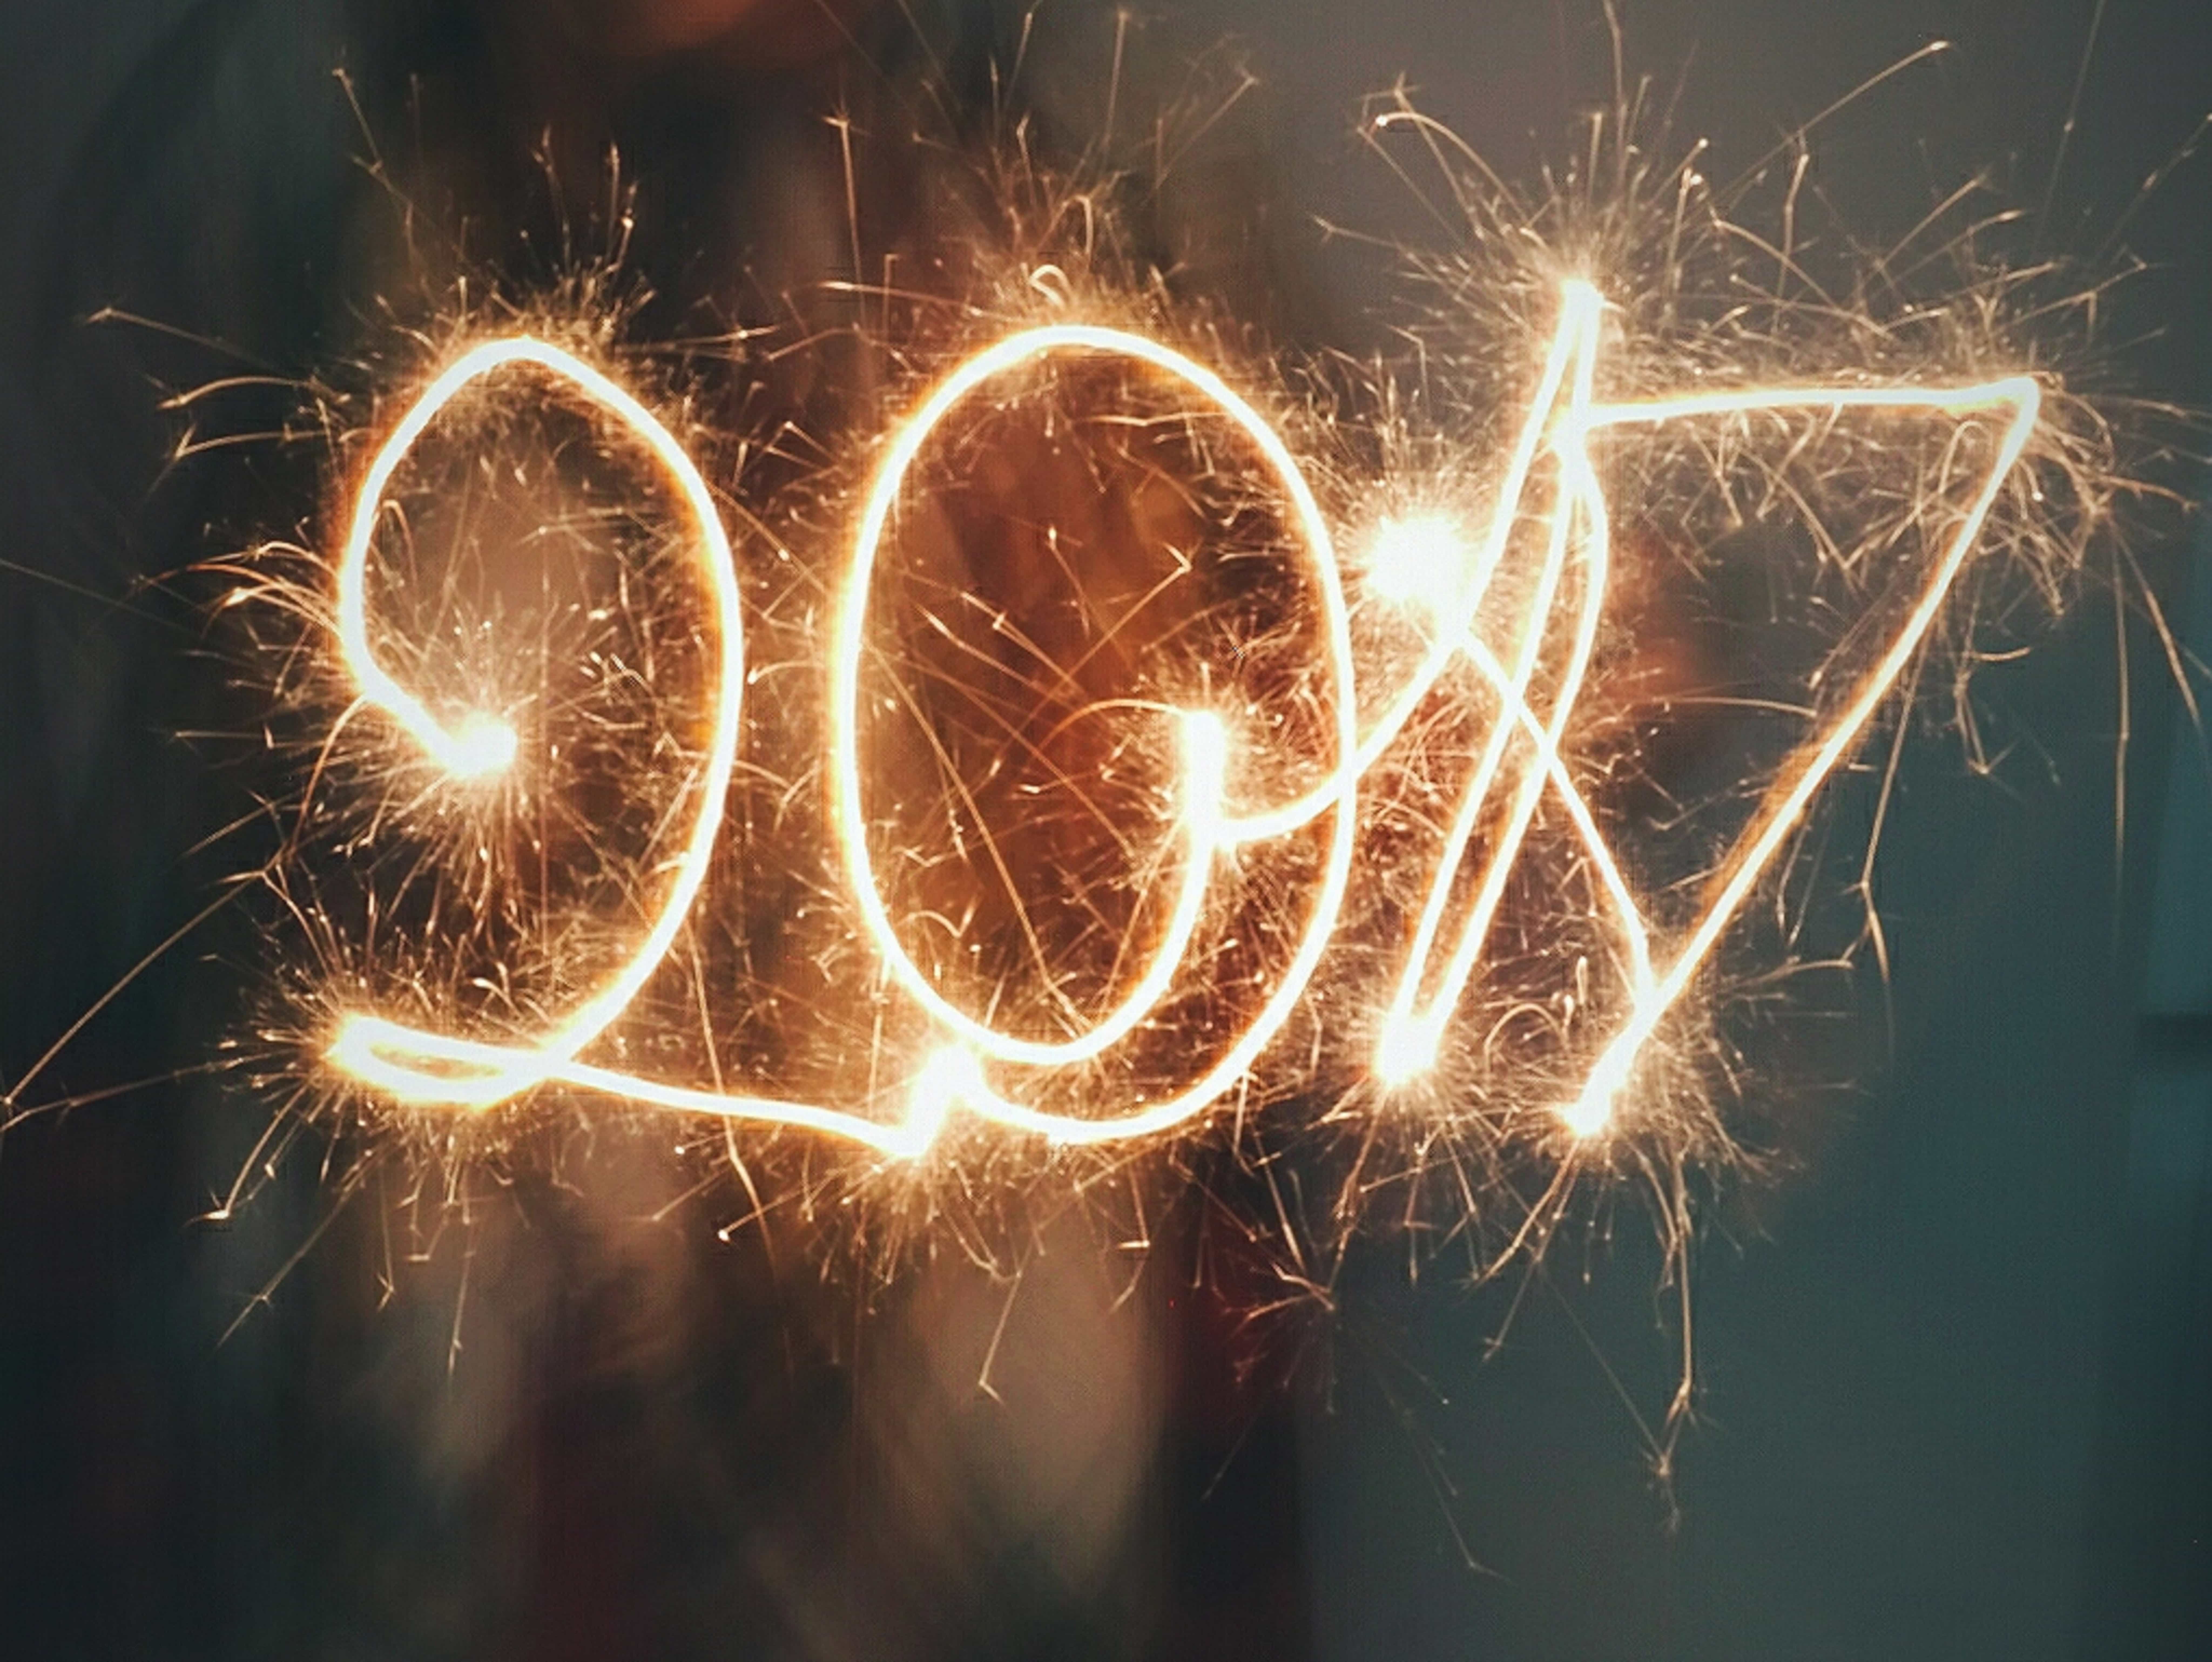 2017 drawn out with sparklers